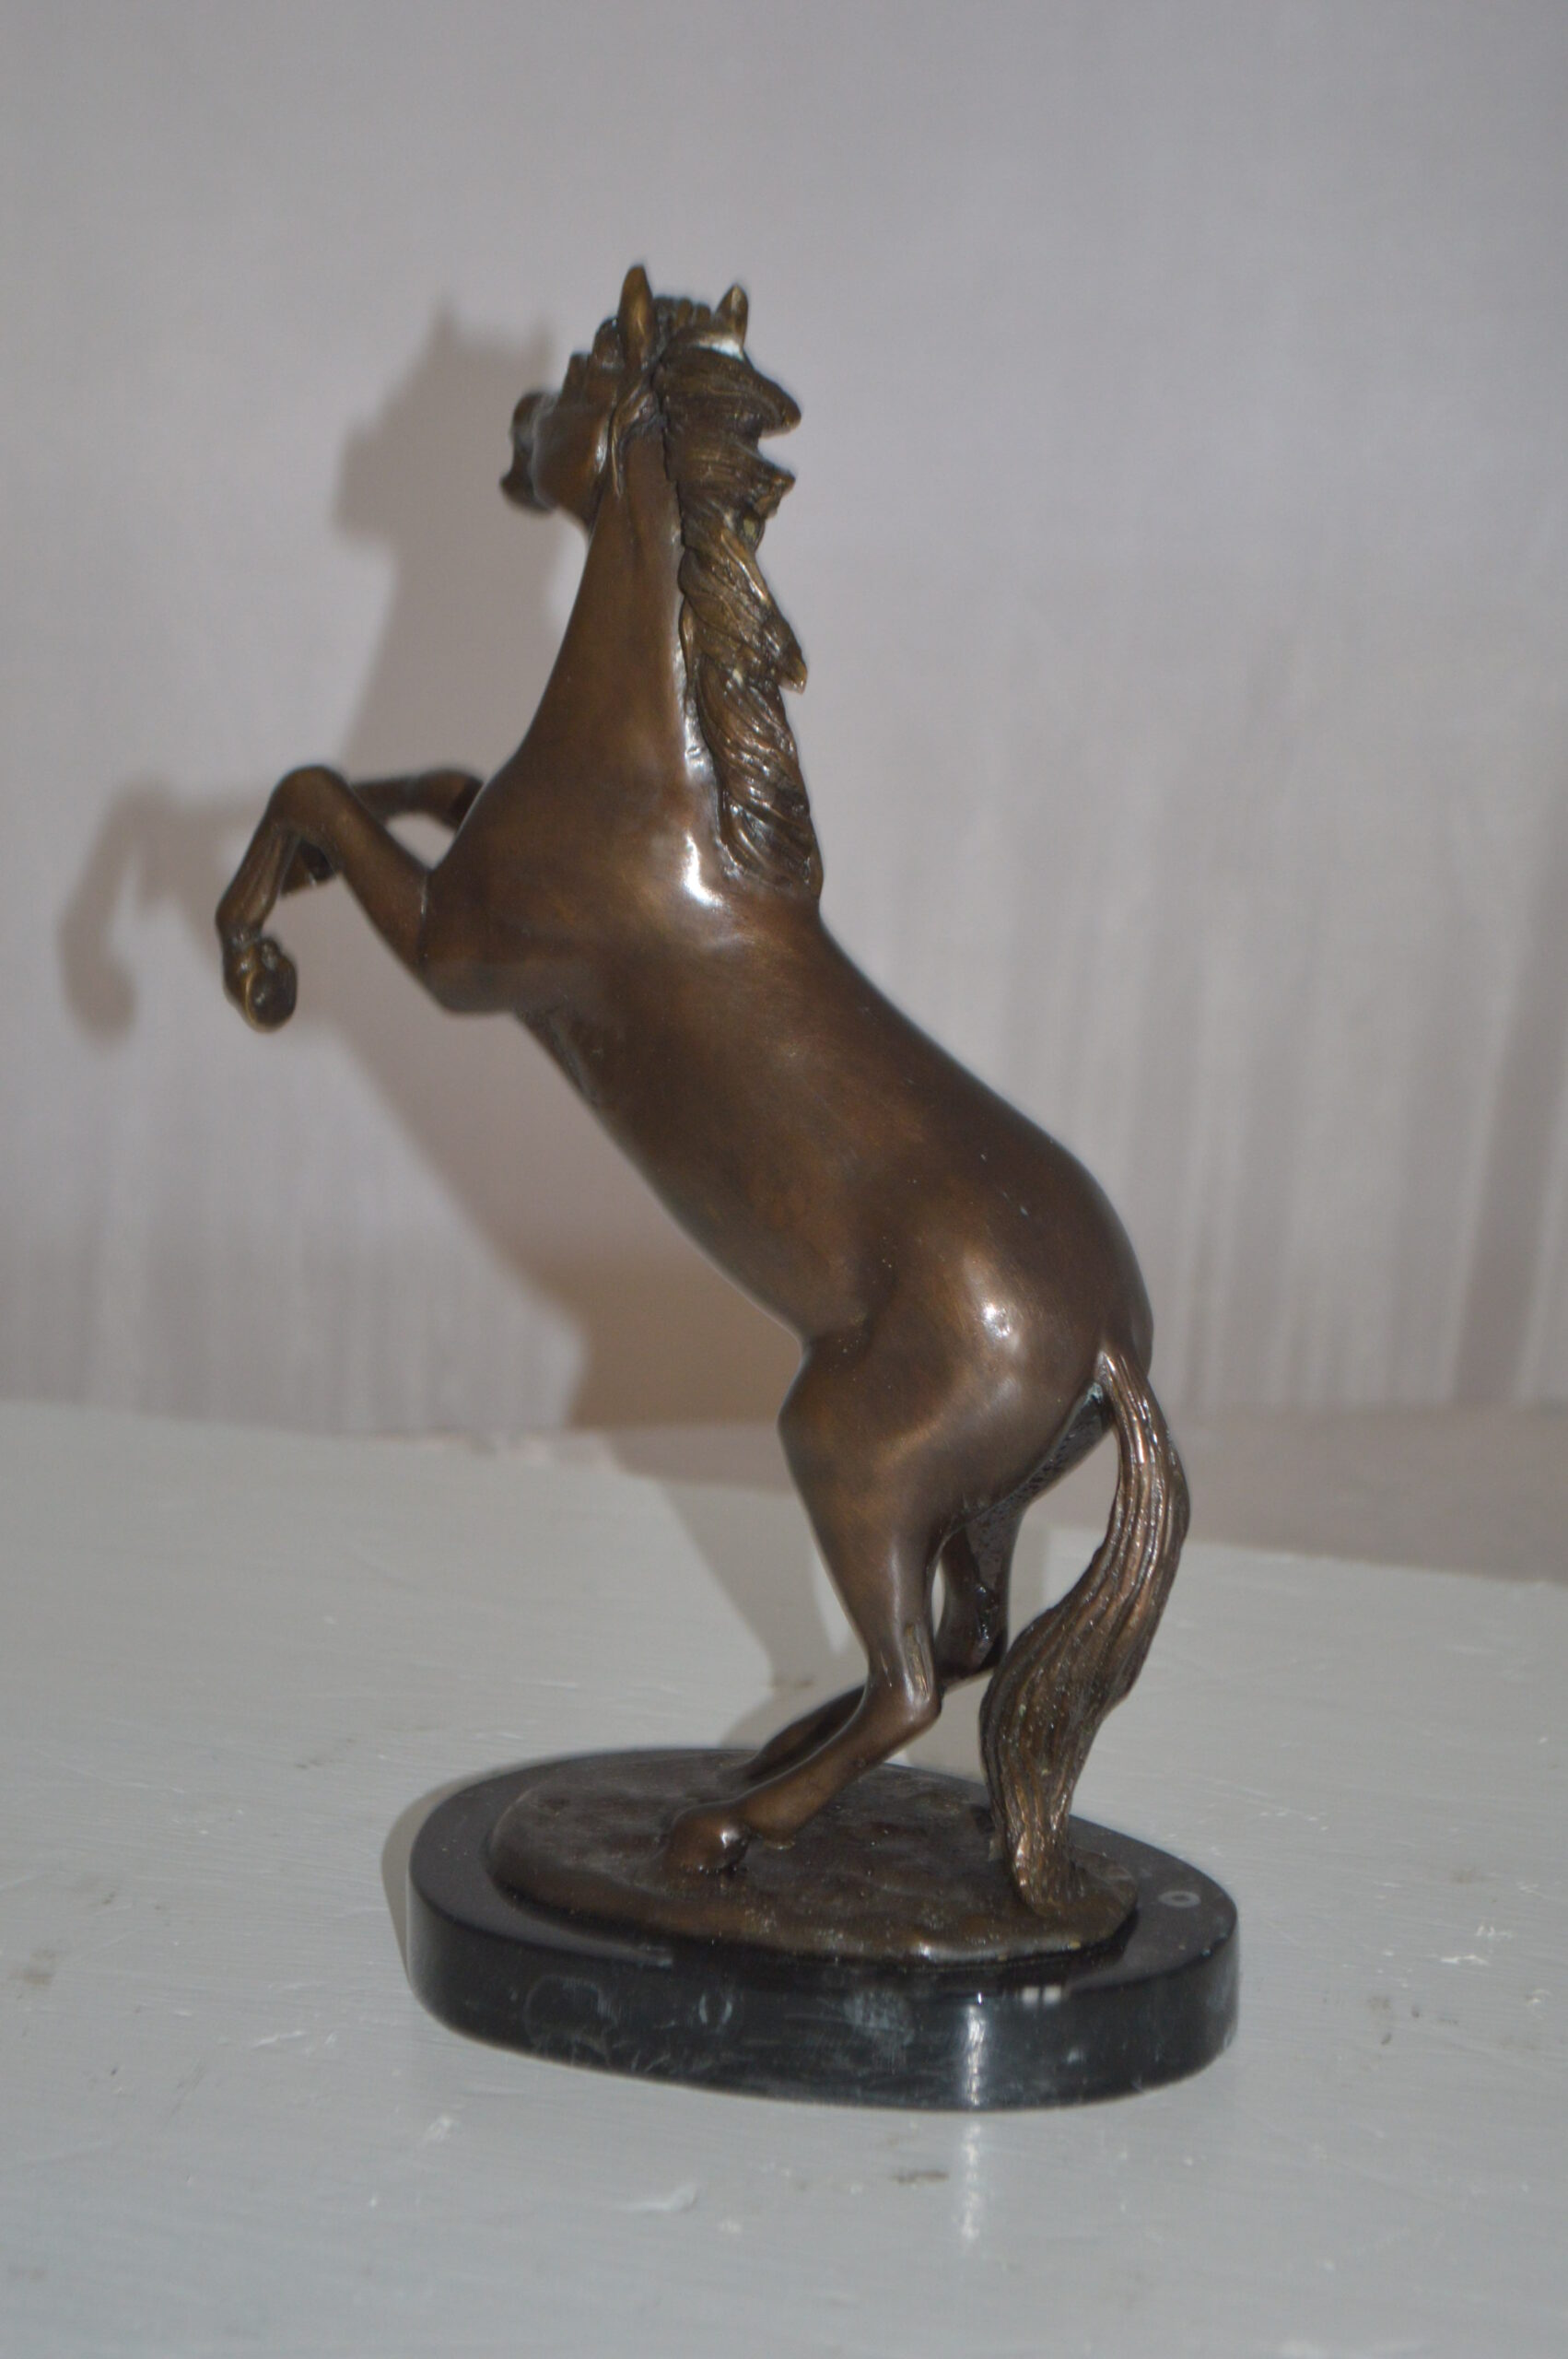 Bronze Statues A Pair Of Rearing Bronze Horses BS-1717, 59% OFF